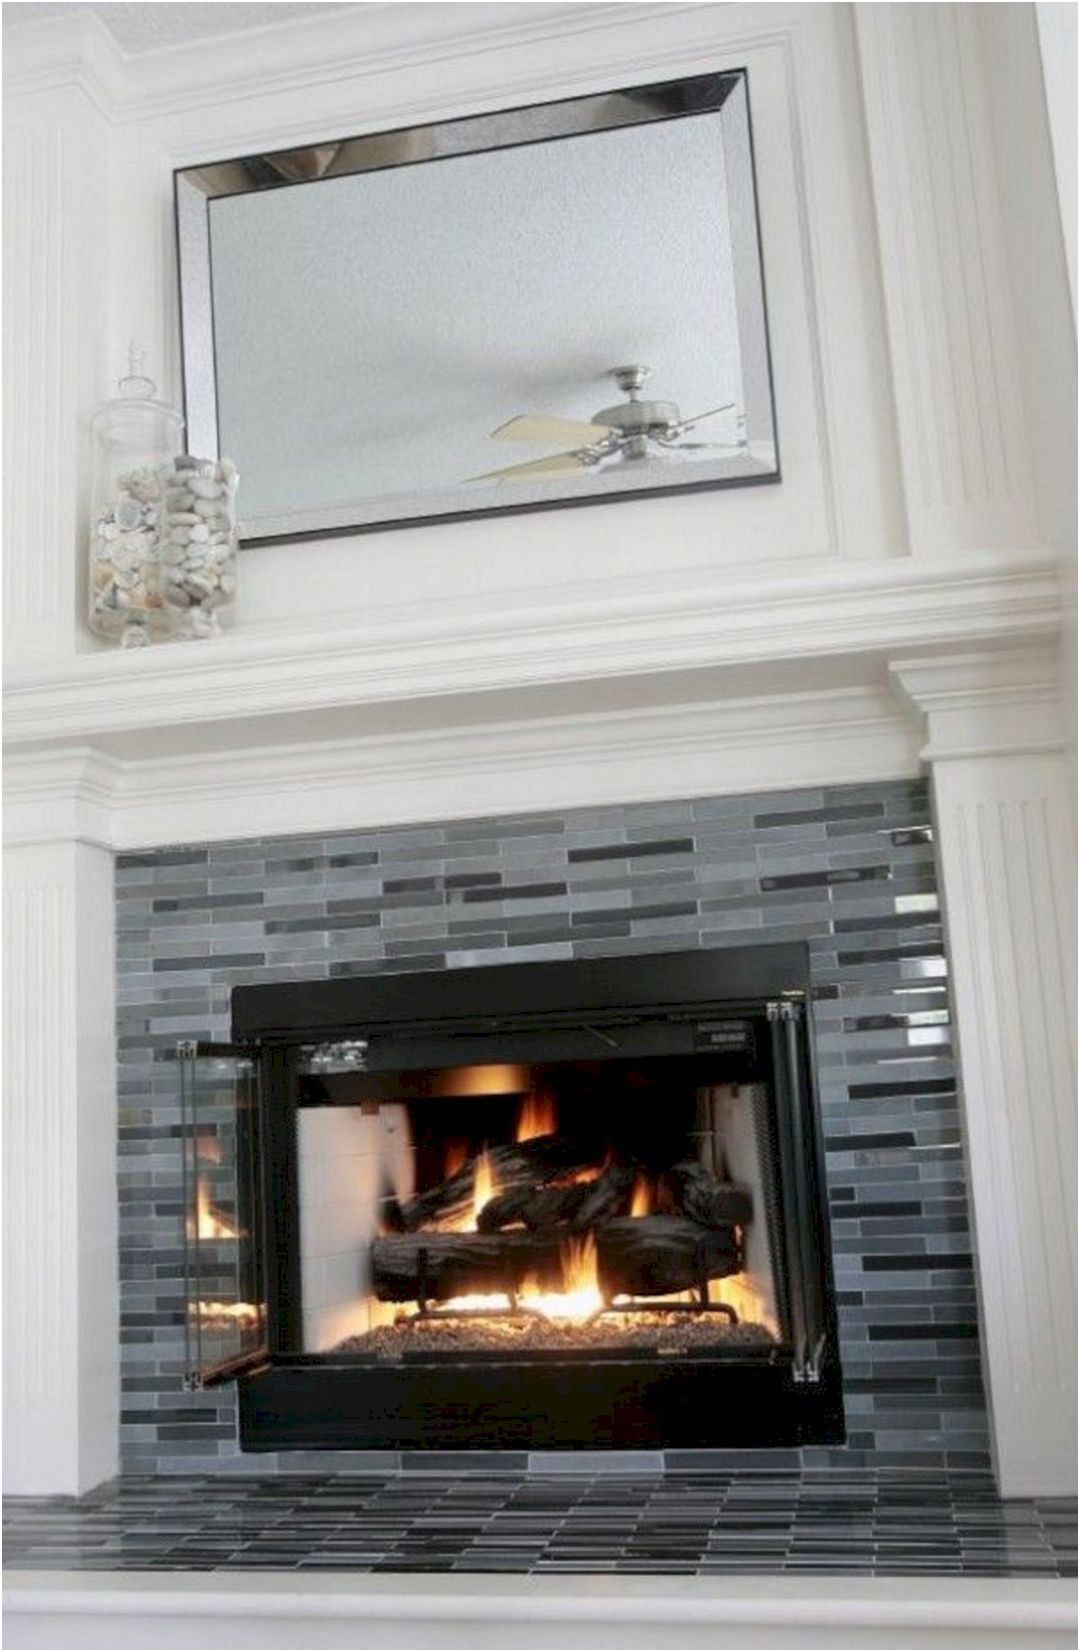 Best Of Tiled Fireplace Ideas